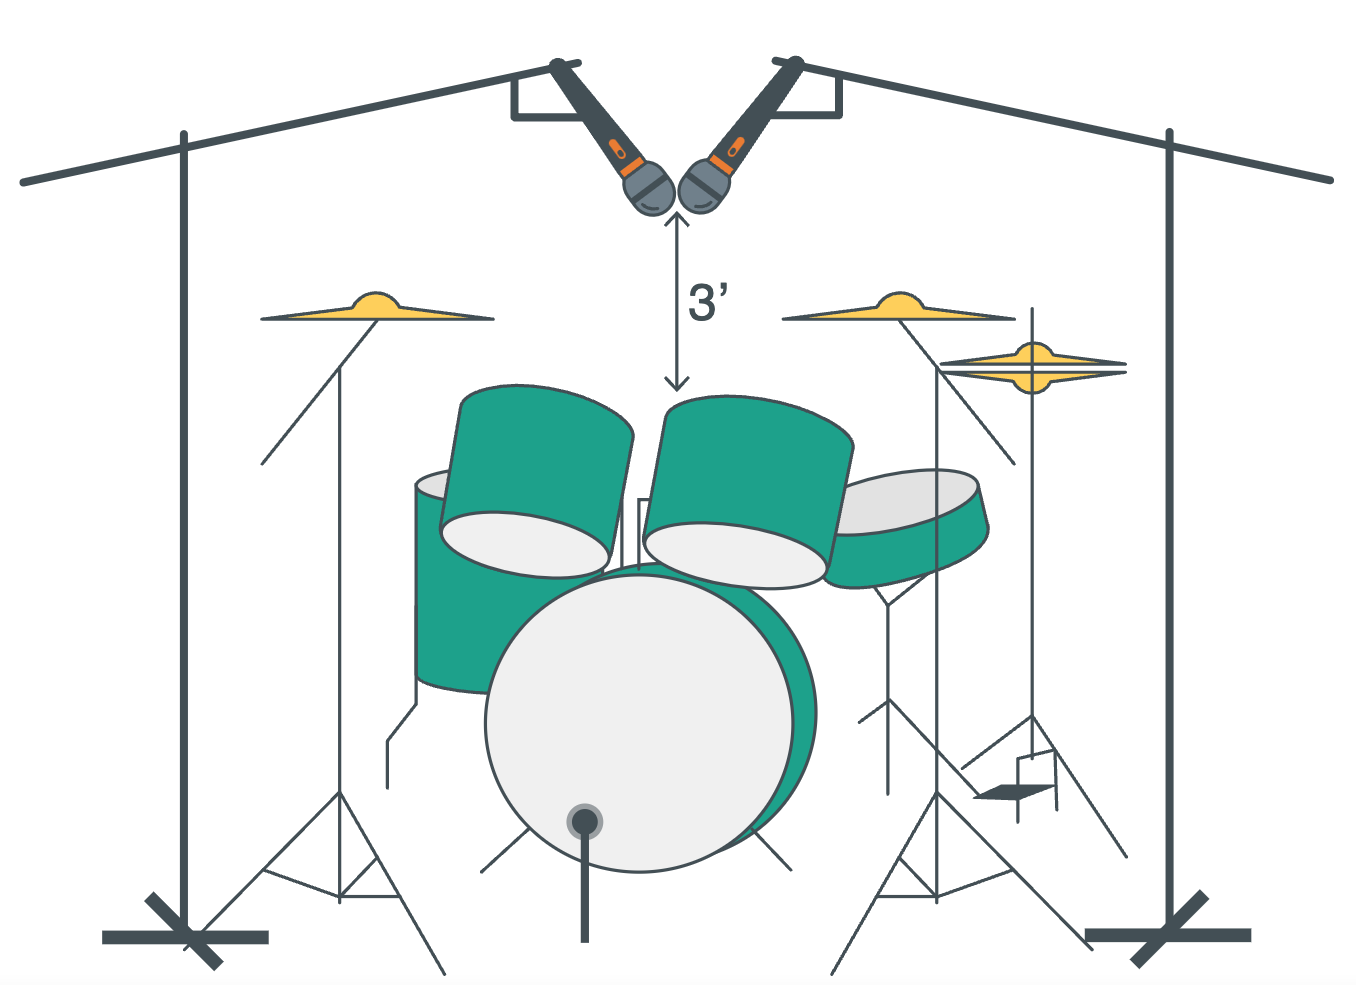 A diagram of a drum set shows what the XY coincident pair looks like as a microphone arrangement.